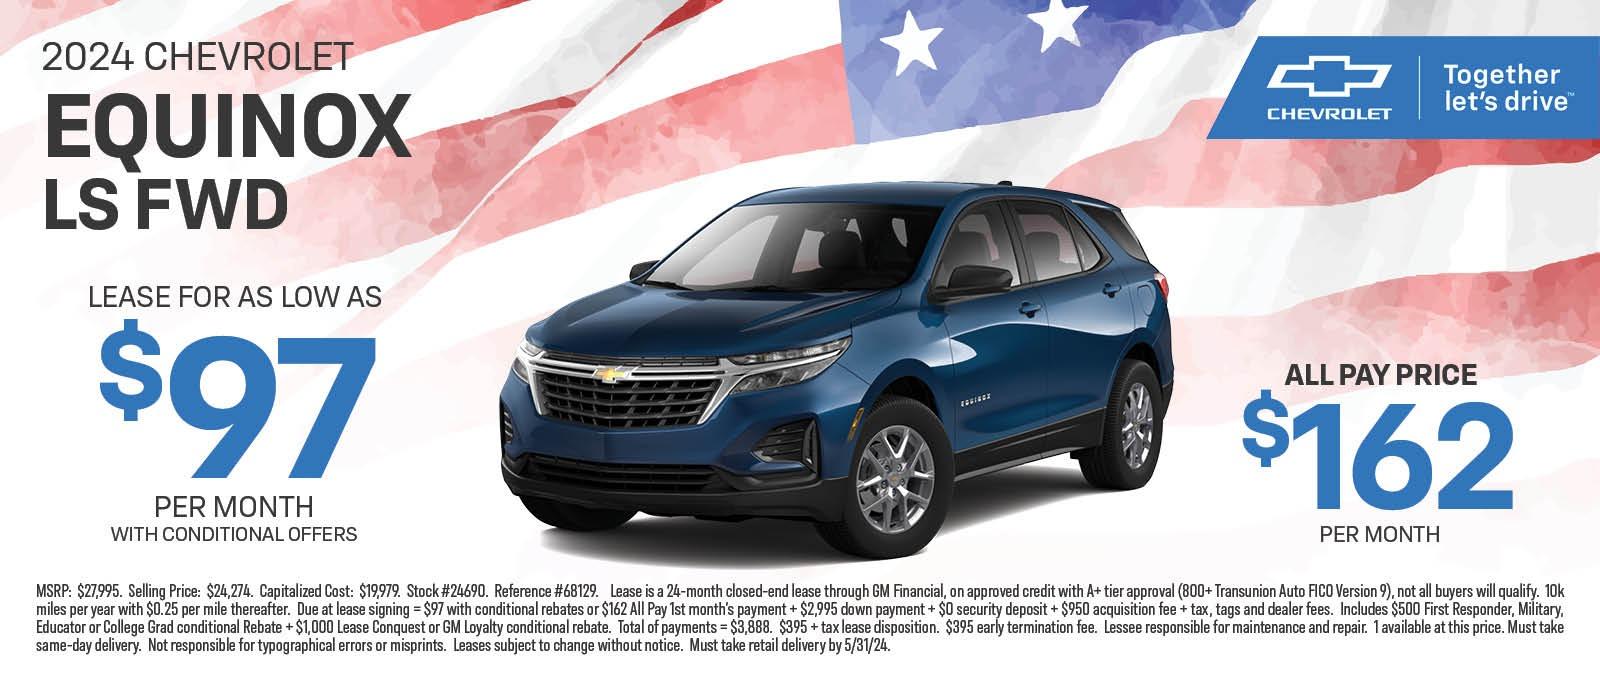 2024 CHEVROLET EQUINOX LS FWD LEASE FOR AS LOW AS $97 PER MONTH WITH CONDITIONAL OFFERS ALL PAY PRICE $162 PER MONTH